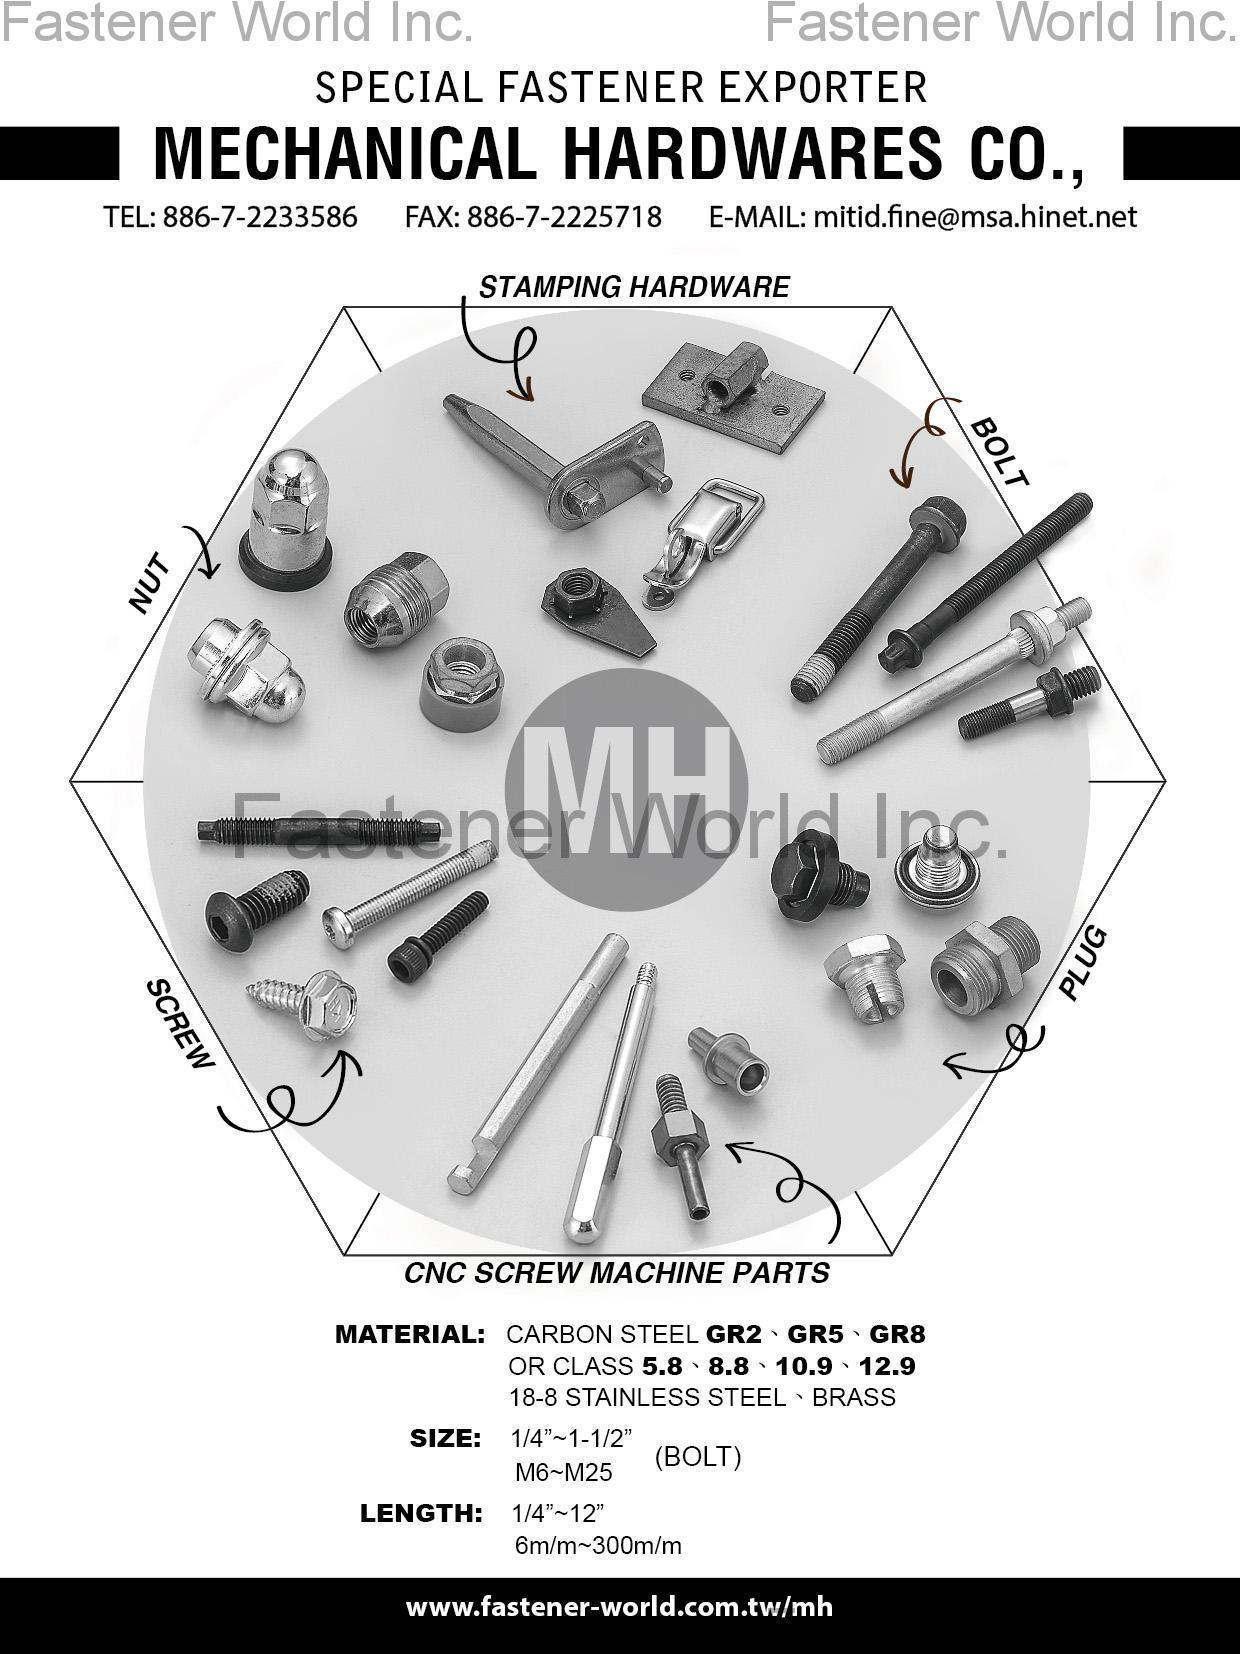 MIT INDUSTRIAL ACCESSORIES CORP. (MECHANICAL HARDWARES CO.) , Stamping Hardware, Bolts, Plug, Nuts, Screws, CNC Screw Machine Parts , Stamped Parts